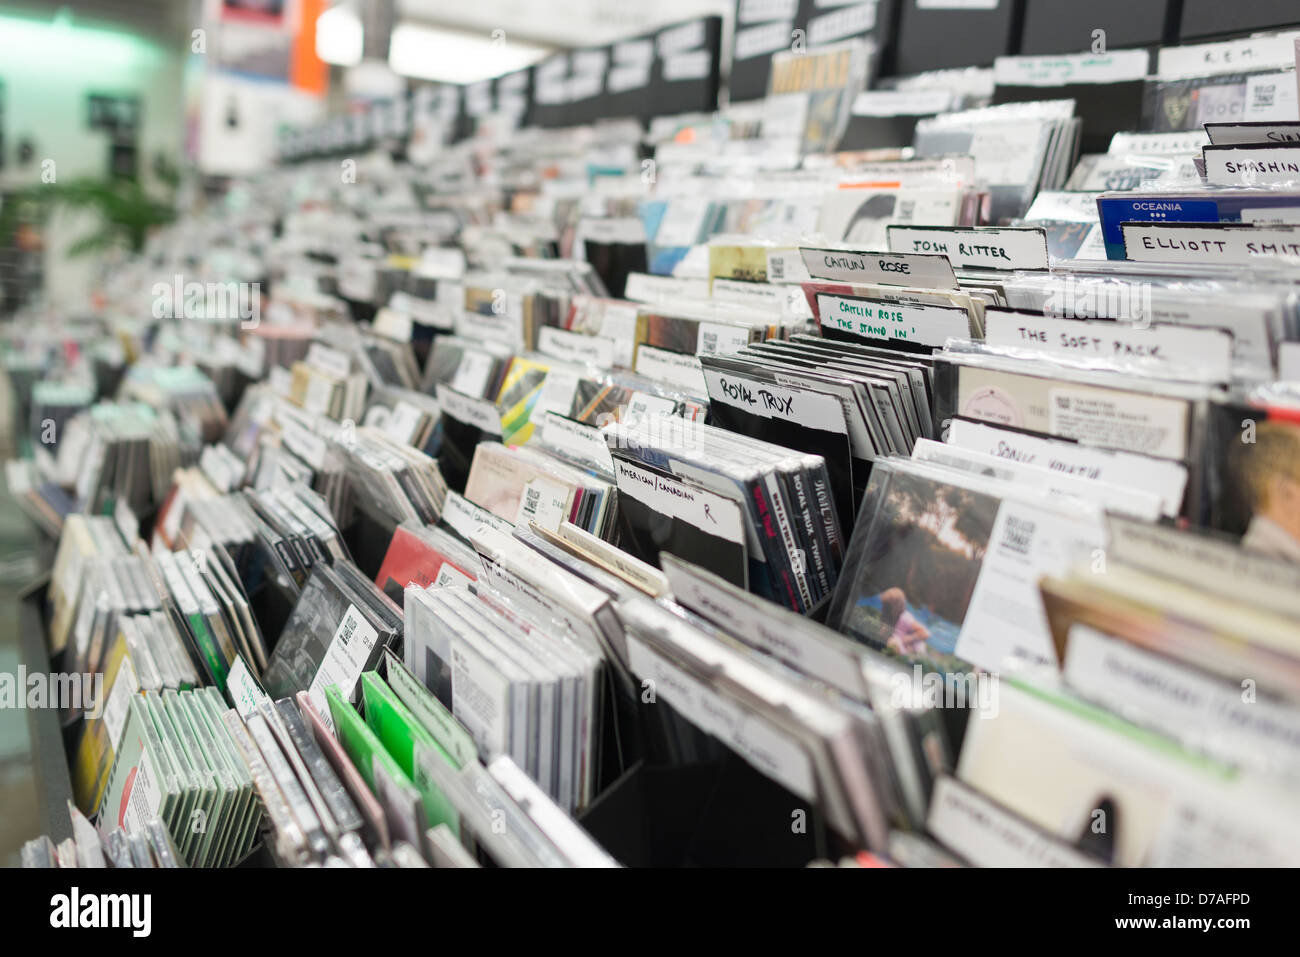 Traditional music store-Compact disks on the shelves,London,England Stock Photo